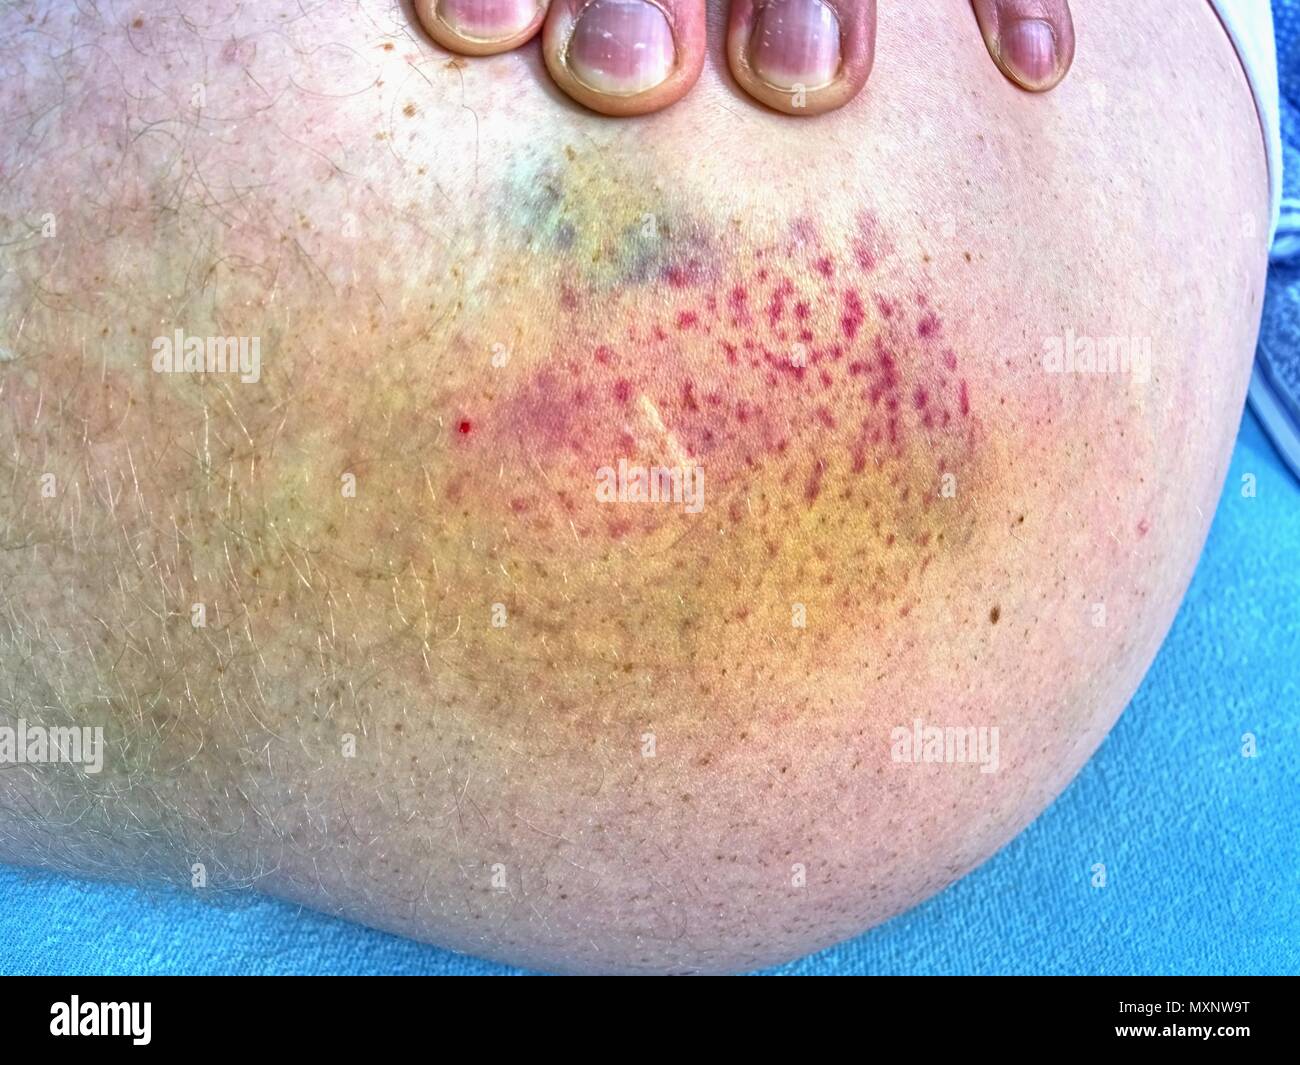 Bruised wound injury.  Patient show injured body with large paintful hematoma. Stock Photo